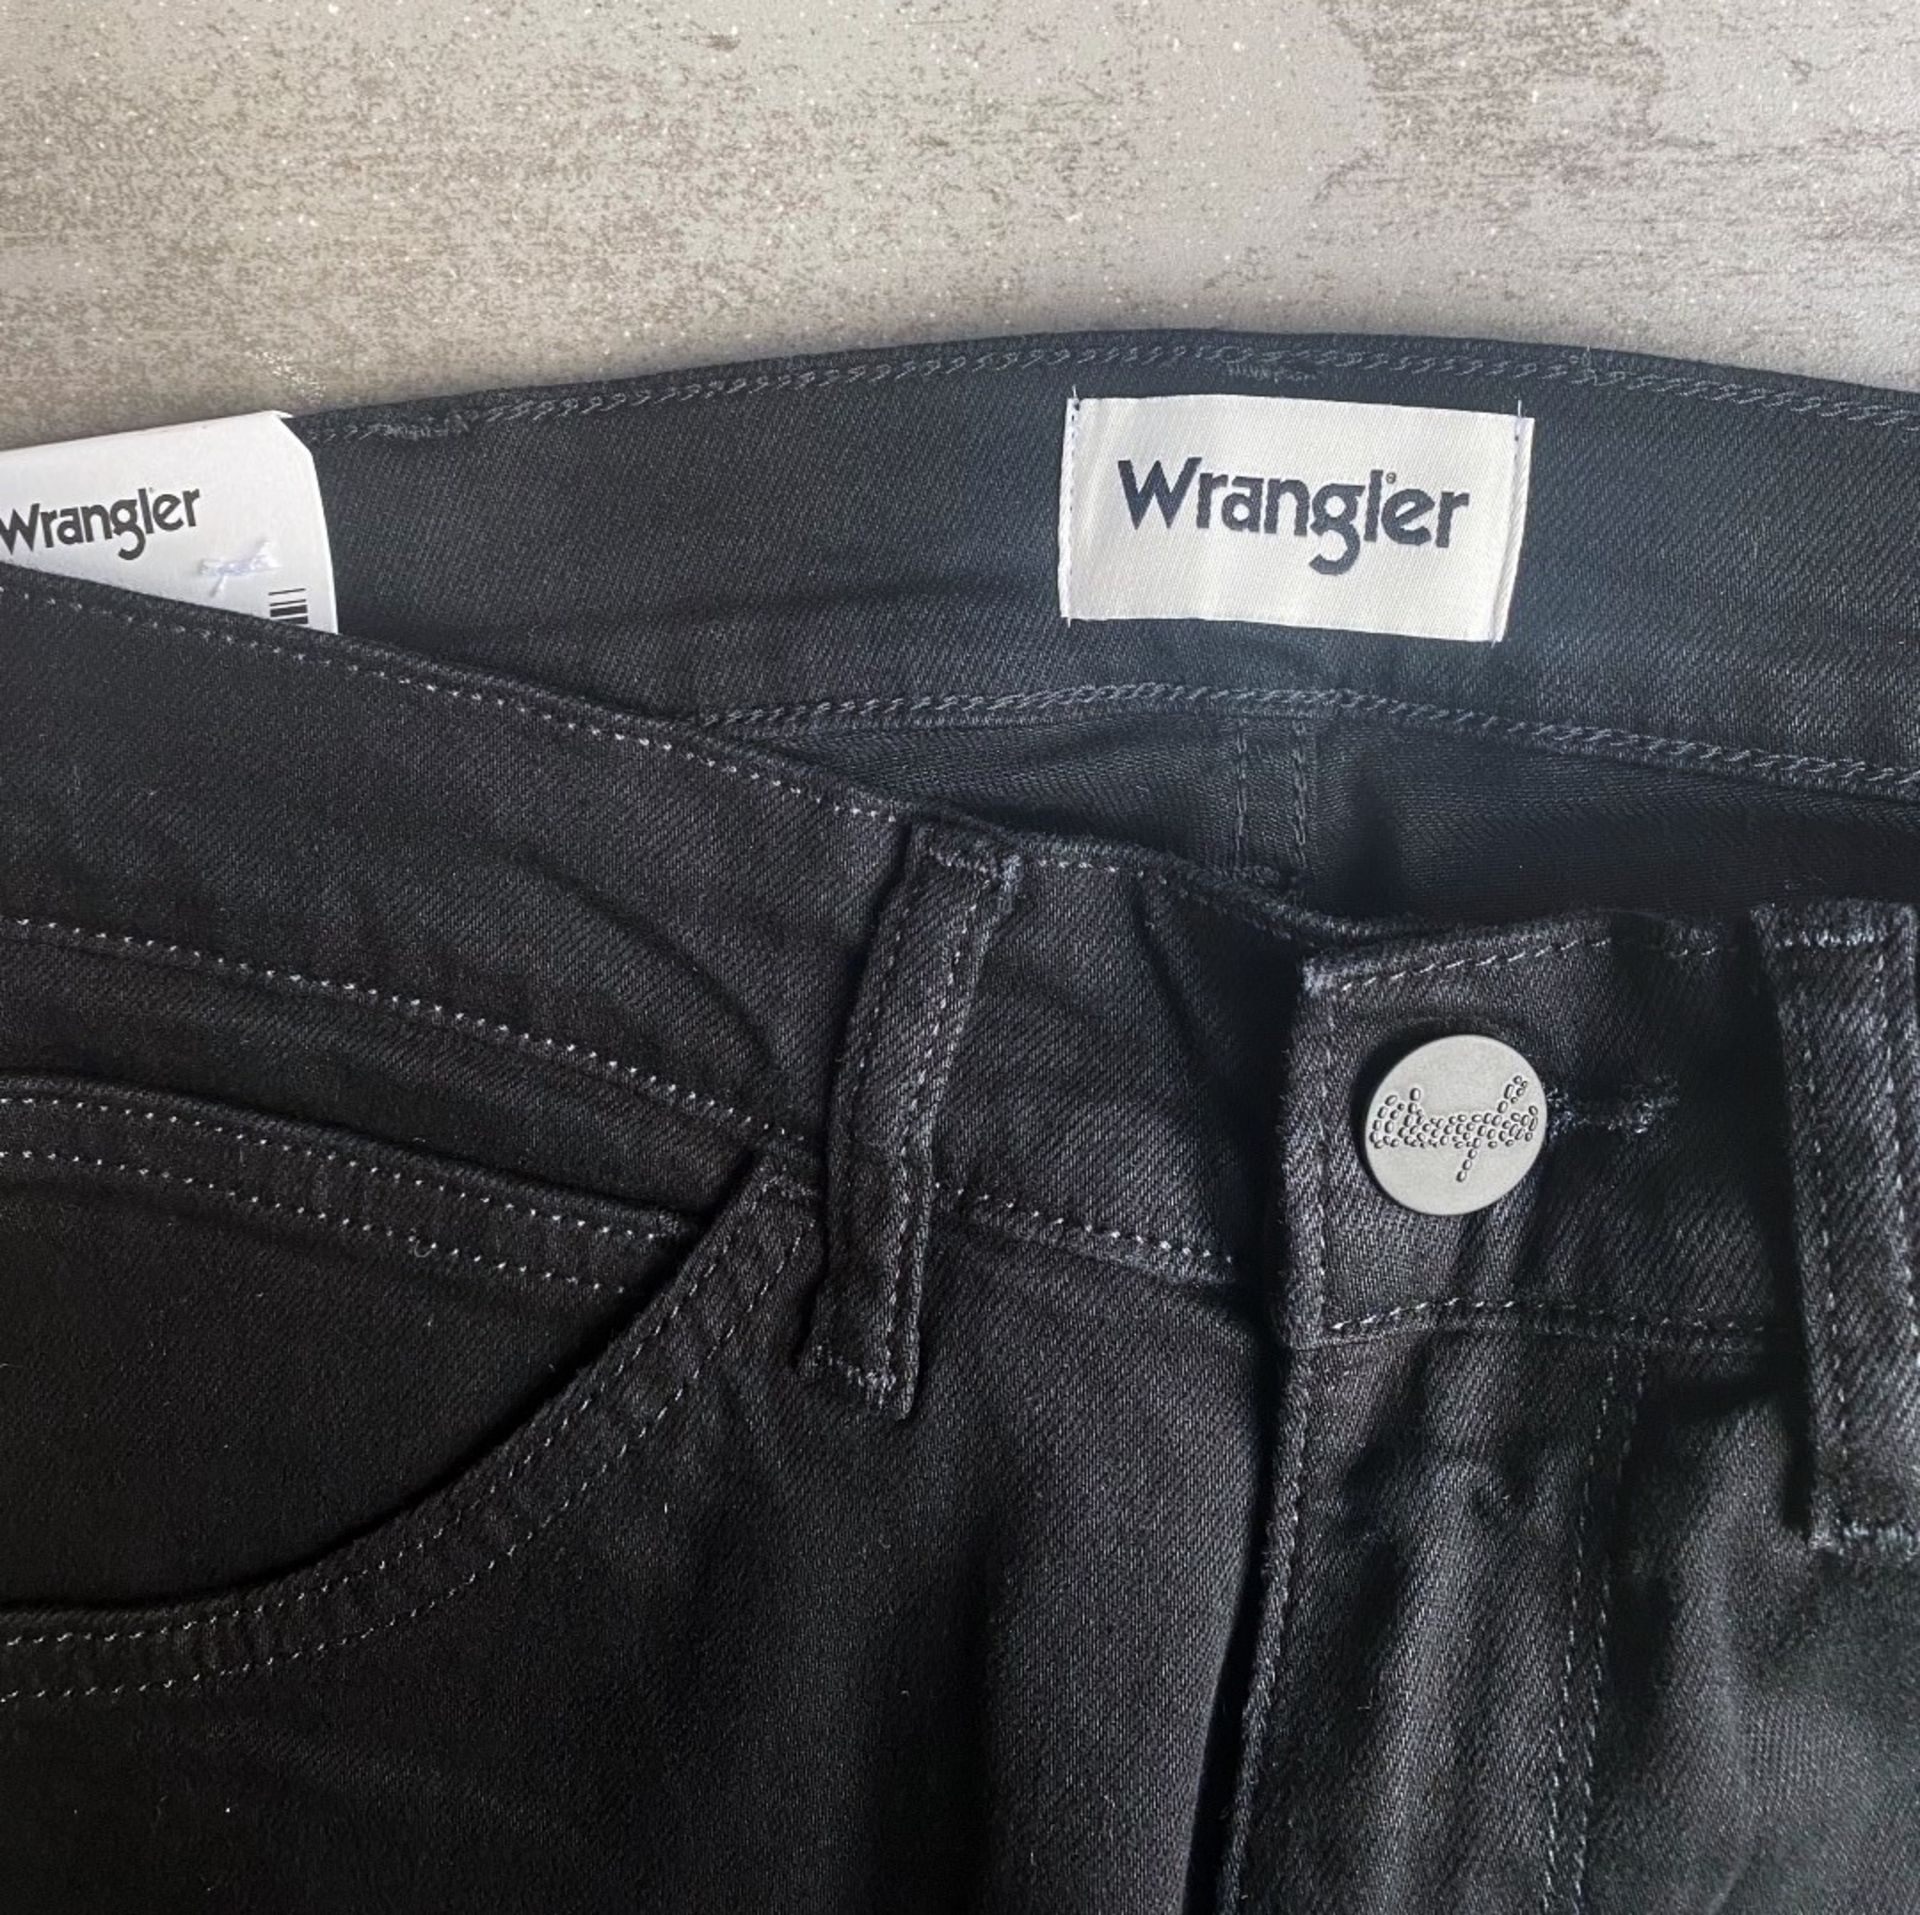 1 x Pair Of Men's Genuine Wrangler Jeans In Black - Size: 30/32 - Preowned, Like New With Tags - - Image 9 of 10